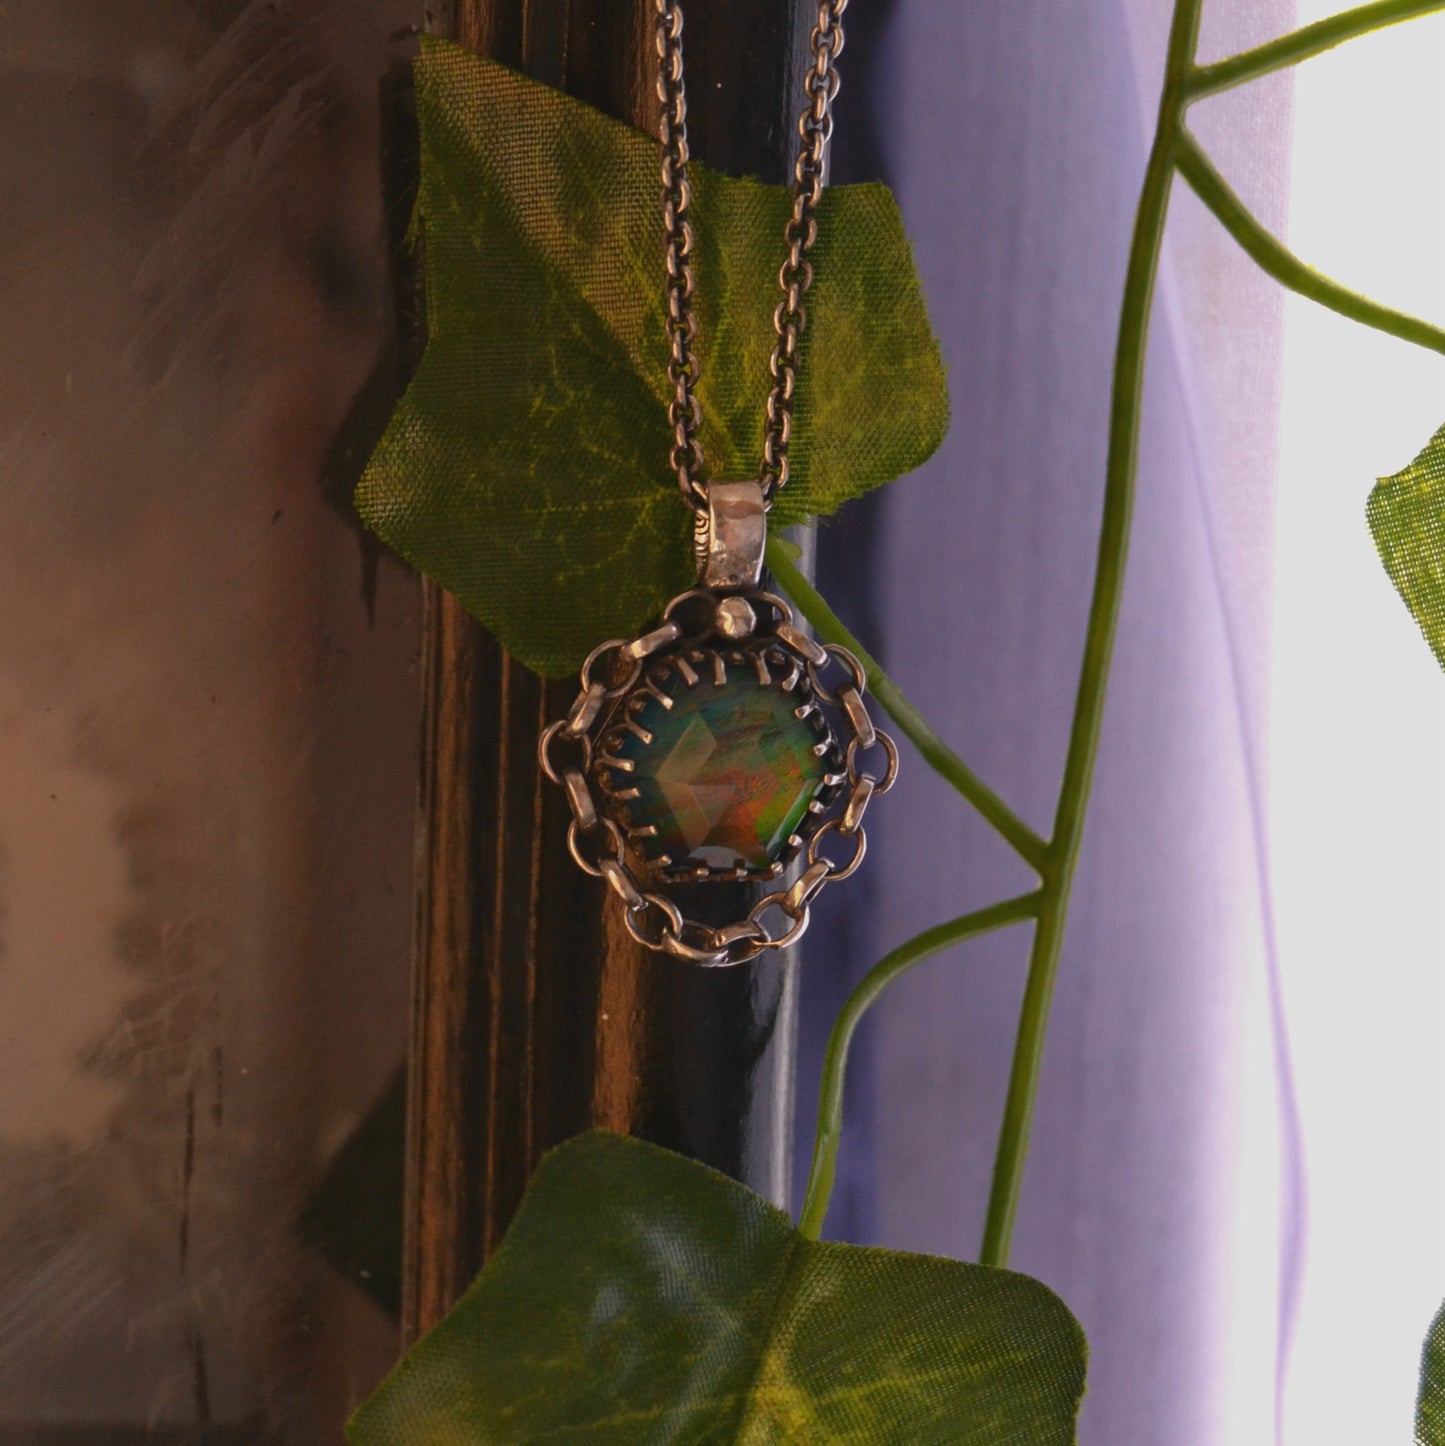 'Electra' Aura Opal doublet pendant and chain necklace